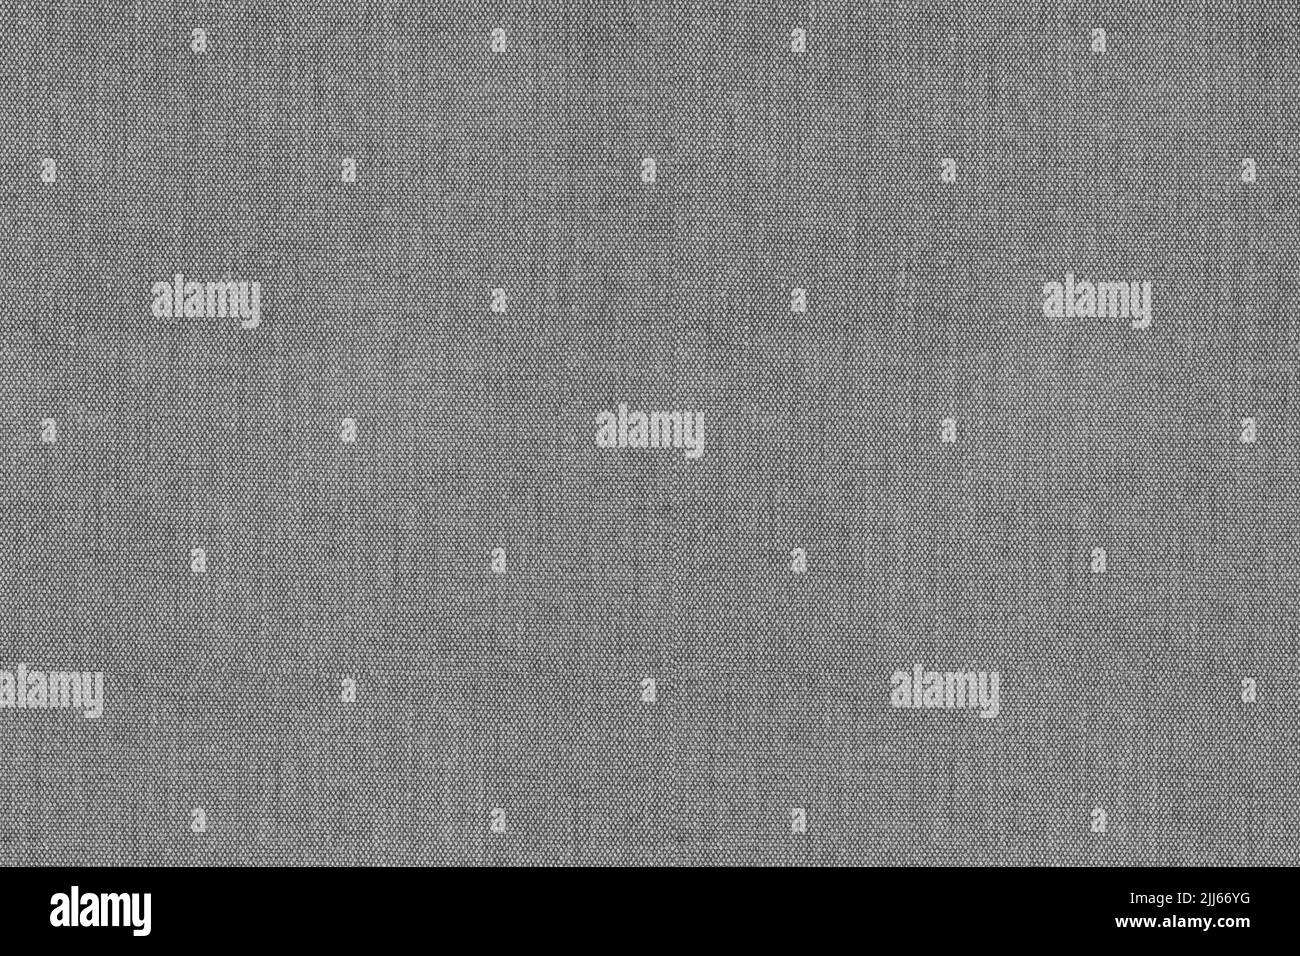 Normal map fabric Black and White Stock Photos & Images - Alamy